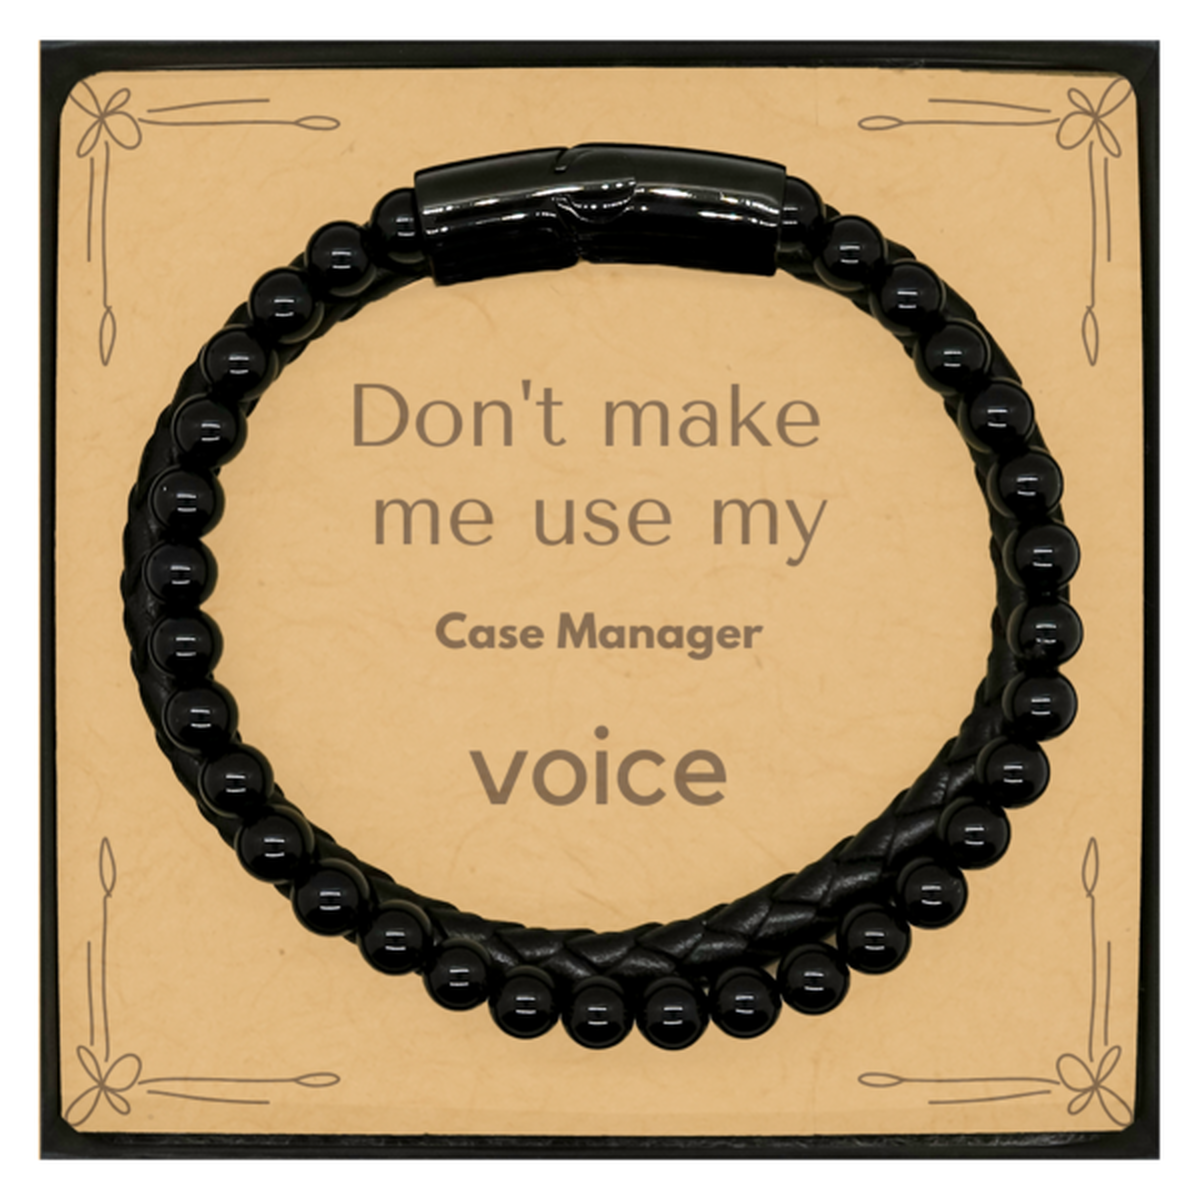 Don't make me use my Case Manager voice, Sarcasm Case Manager Card Gifts, Christmas Case Manager Stone Leather Bracelets Birthday Unique Gifts For Case Manager Coworkers, Men, Women, Colleague, Friends